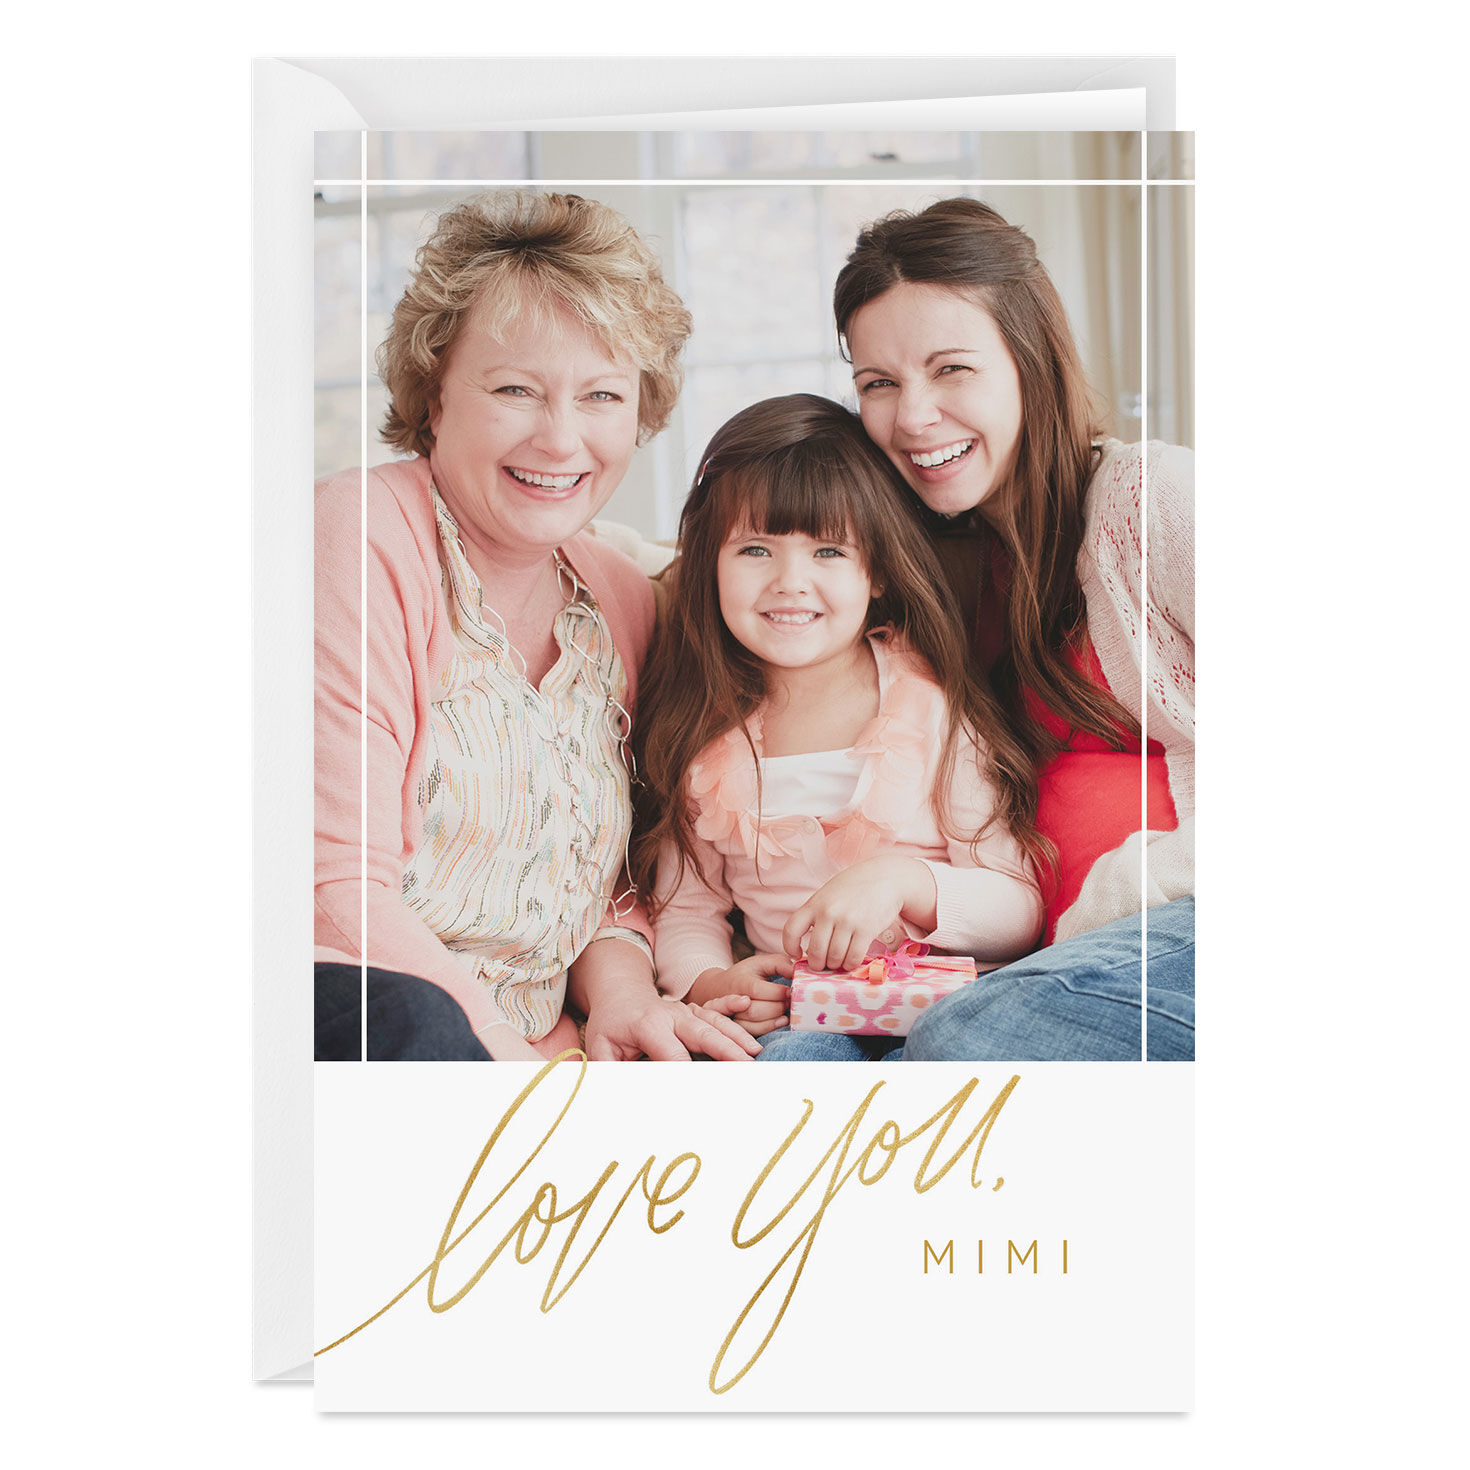 Personalized Elegant Love You Photo Card for only USD 4.99 | Hallmark